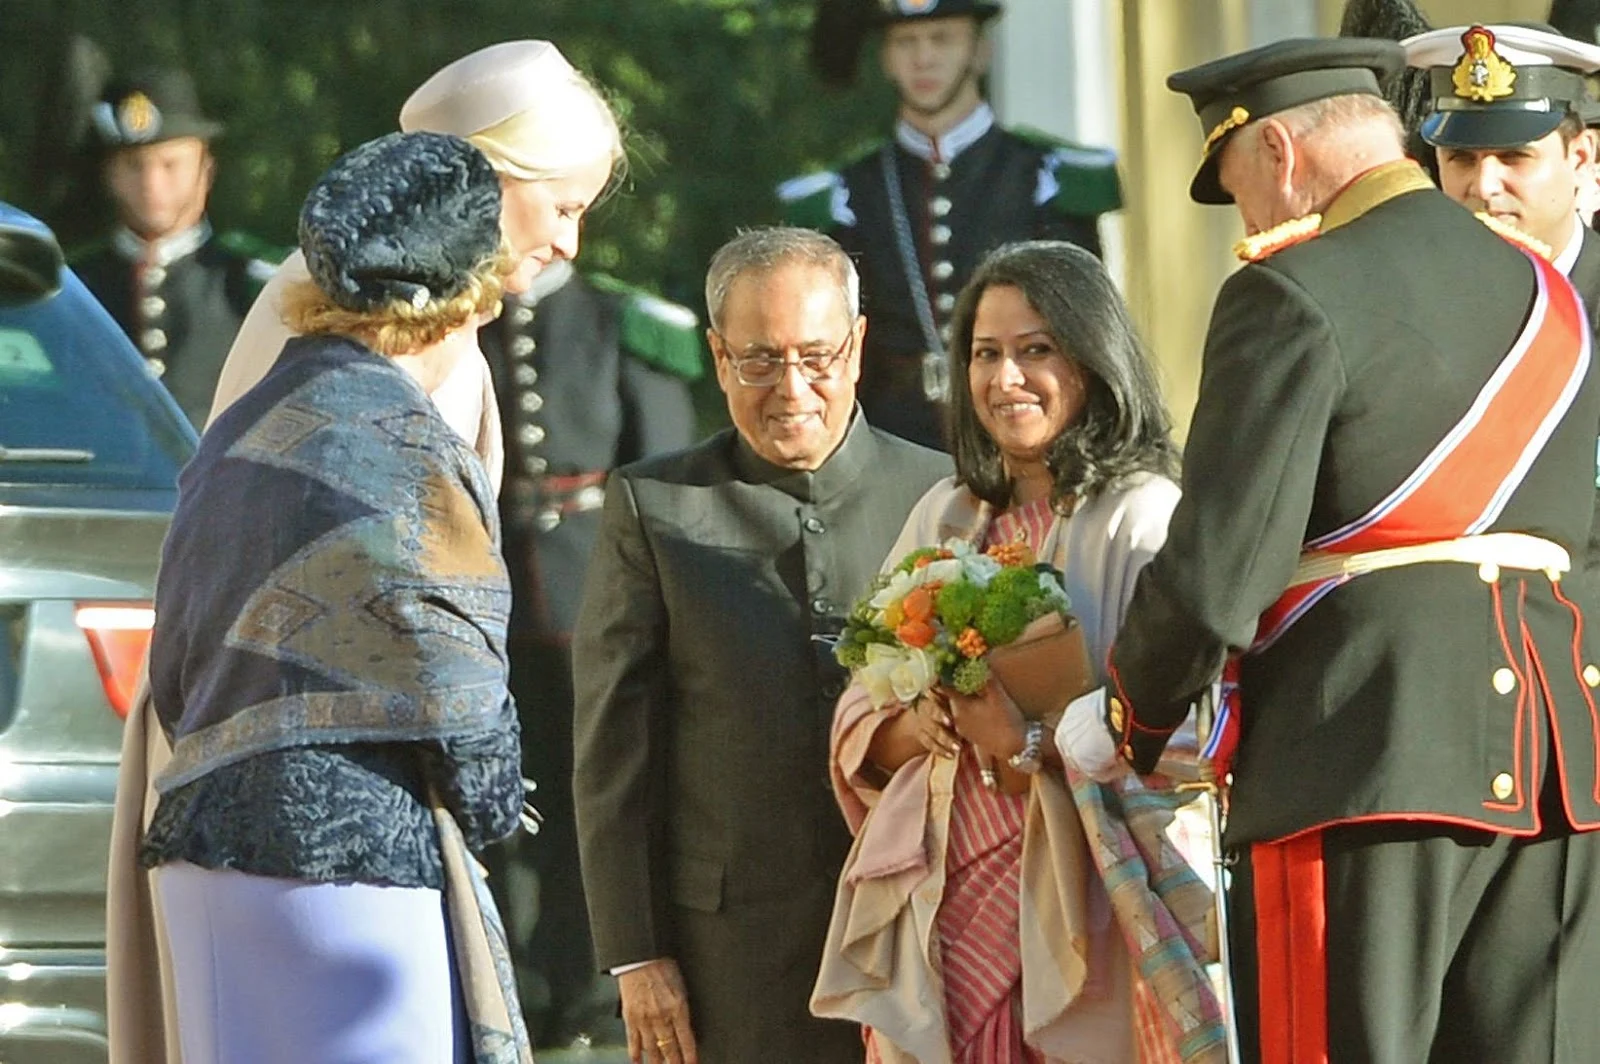 Norwegian Royal Family welcome the President of India, Pranab Mukherjee and his daughter, Sharmistha Mukherjee to Norway on the first day of their state visit to the country.